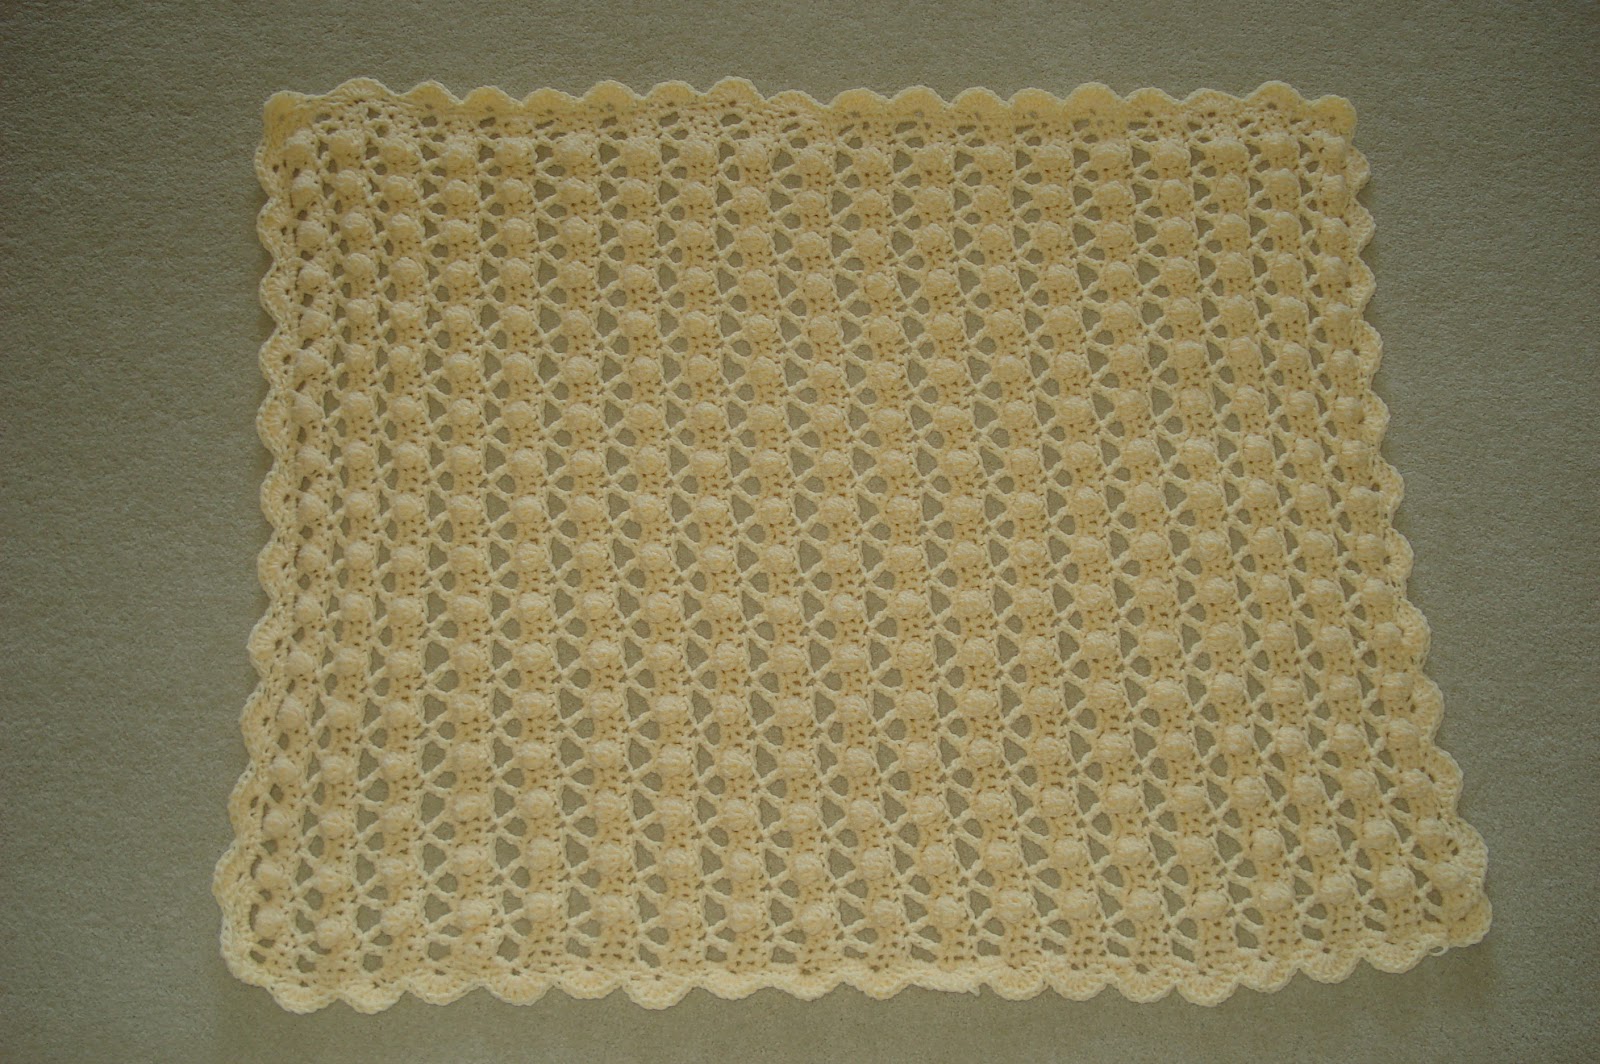 Elle Is For Living Crocheted Popcorn Stitch Baby Blanket